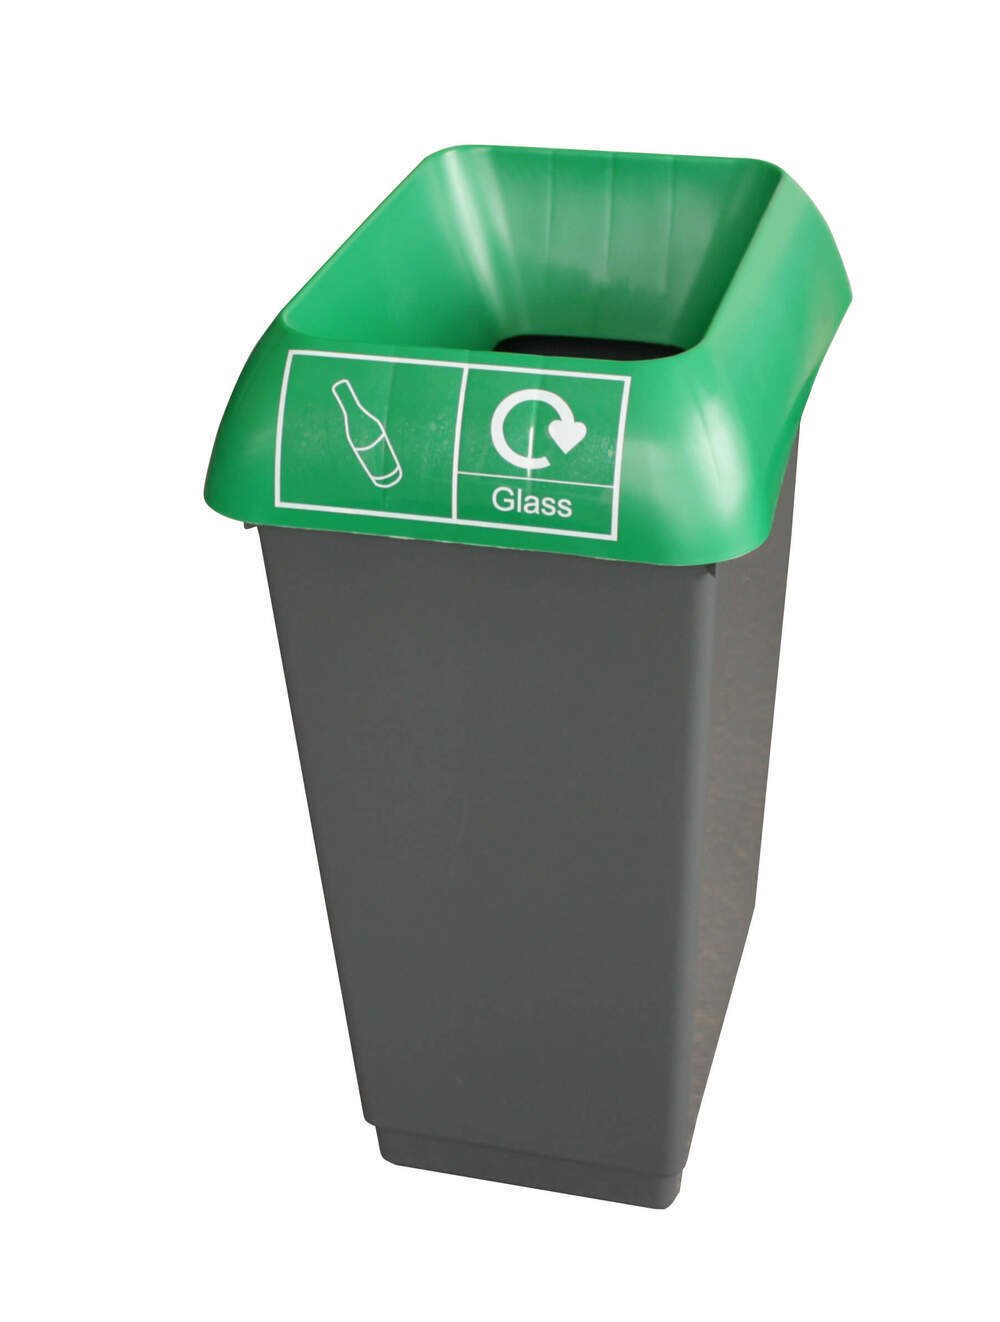 50L Recycling Bin With Green Lid With Mixed Recyclables Logo